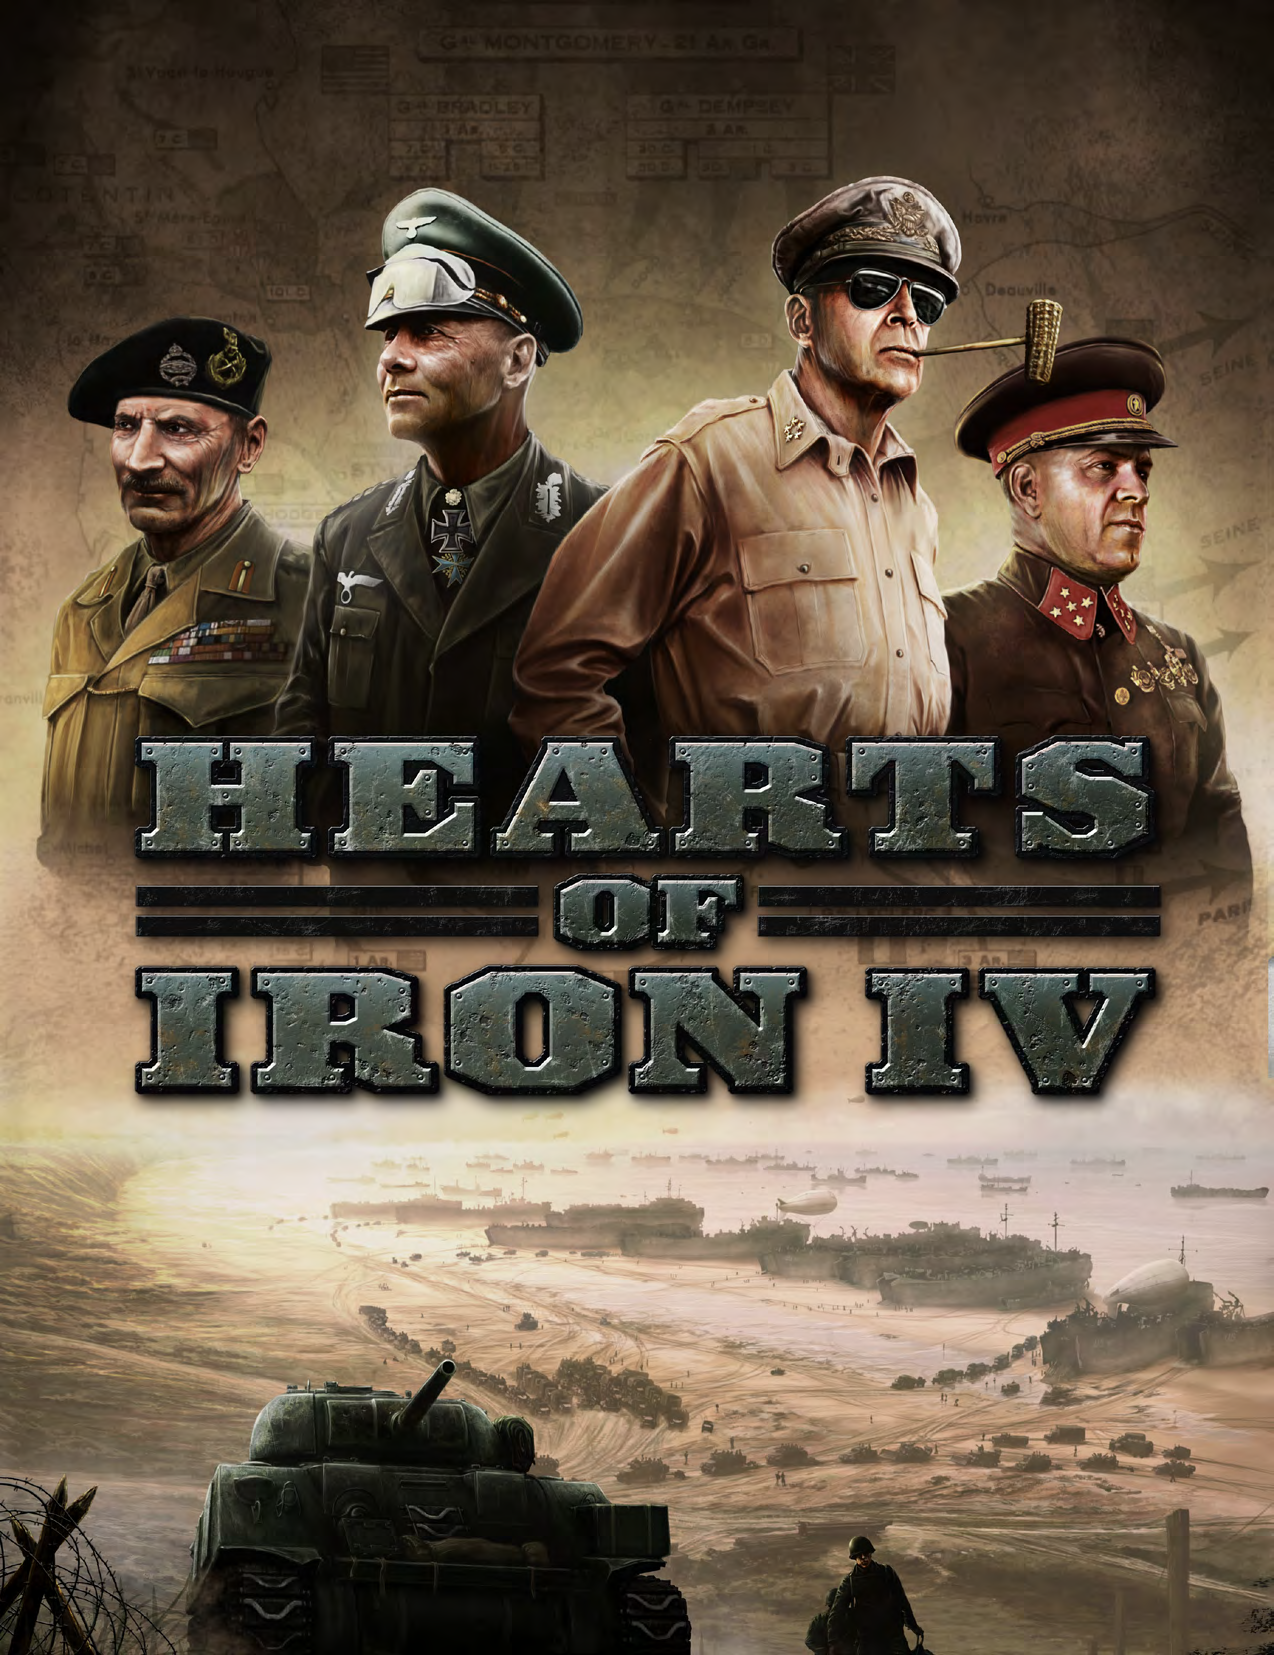 hearts of iron 4 combat guide